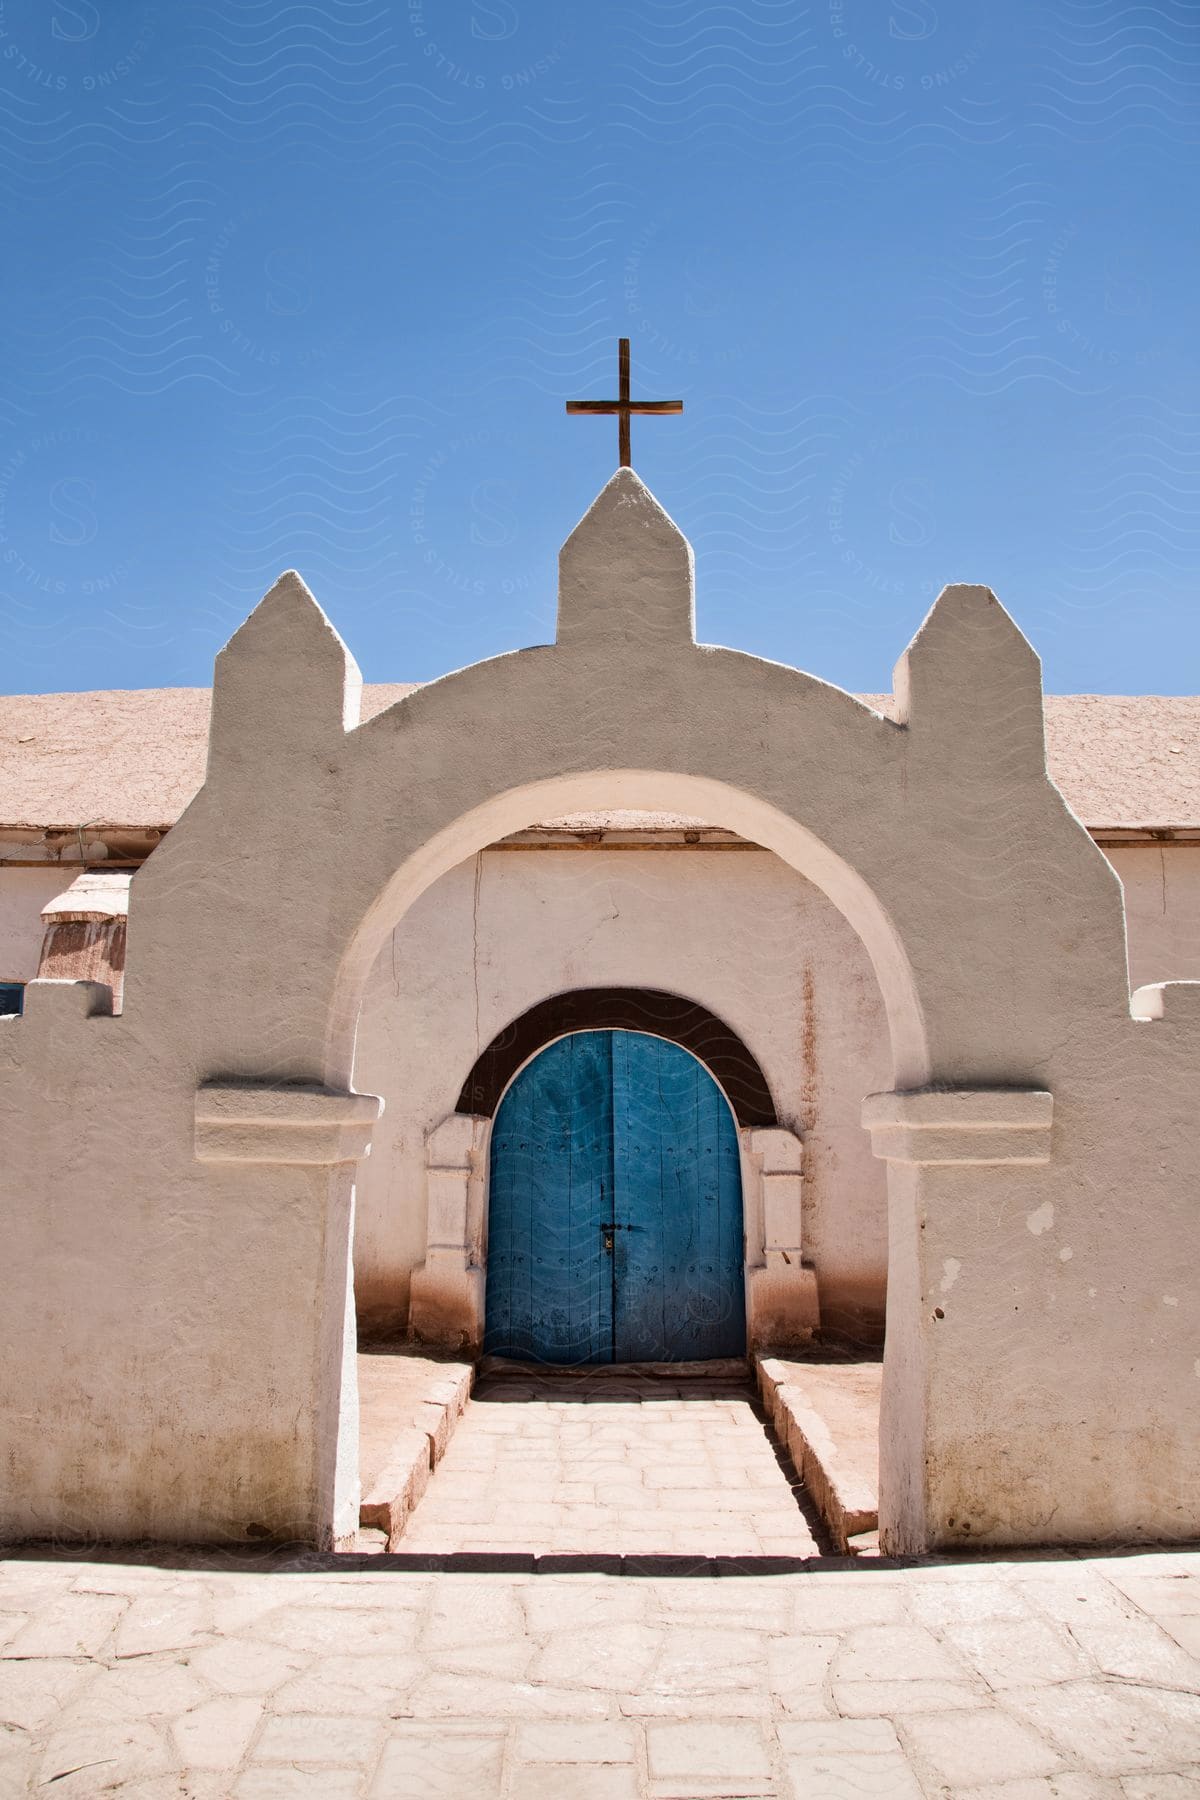 Exterior of a church with a symbol and arch